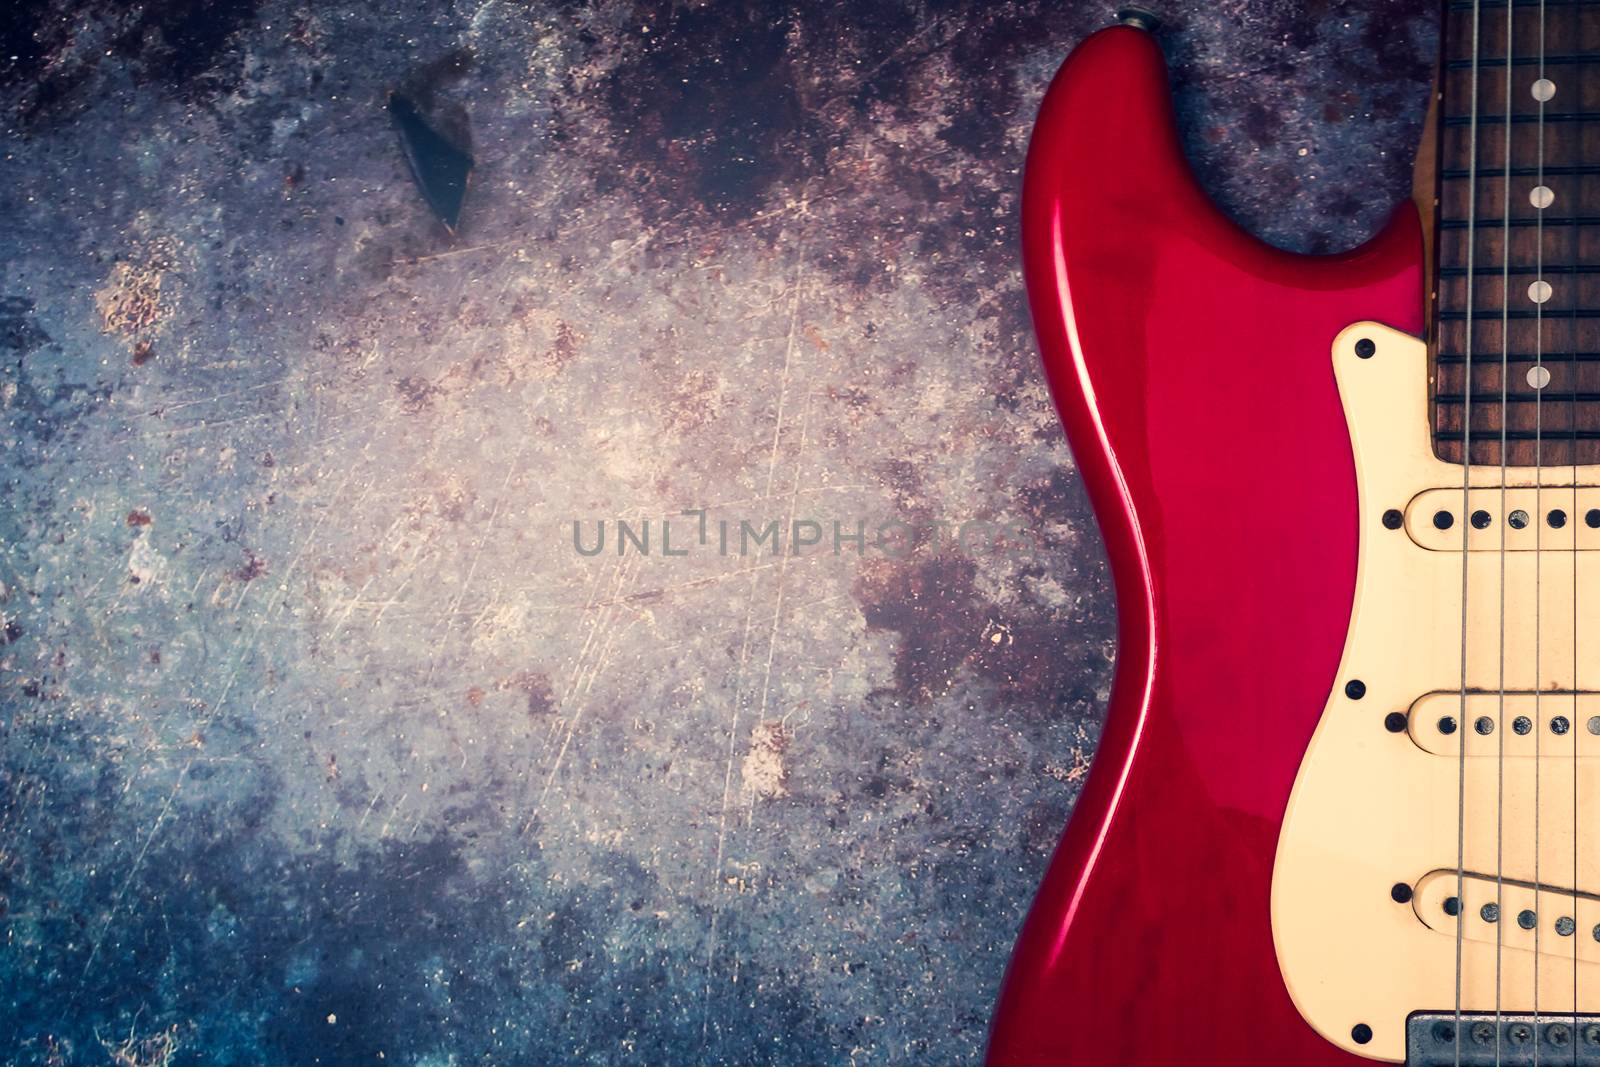 A red electric guitar on a grunge background.